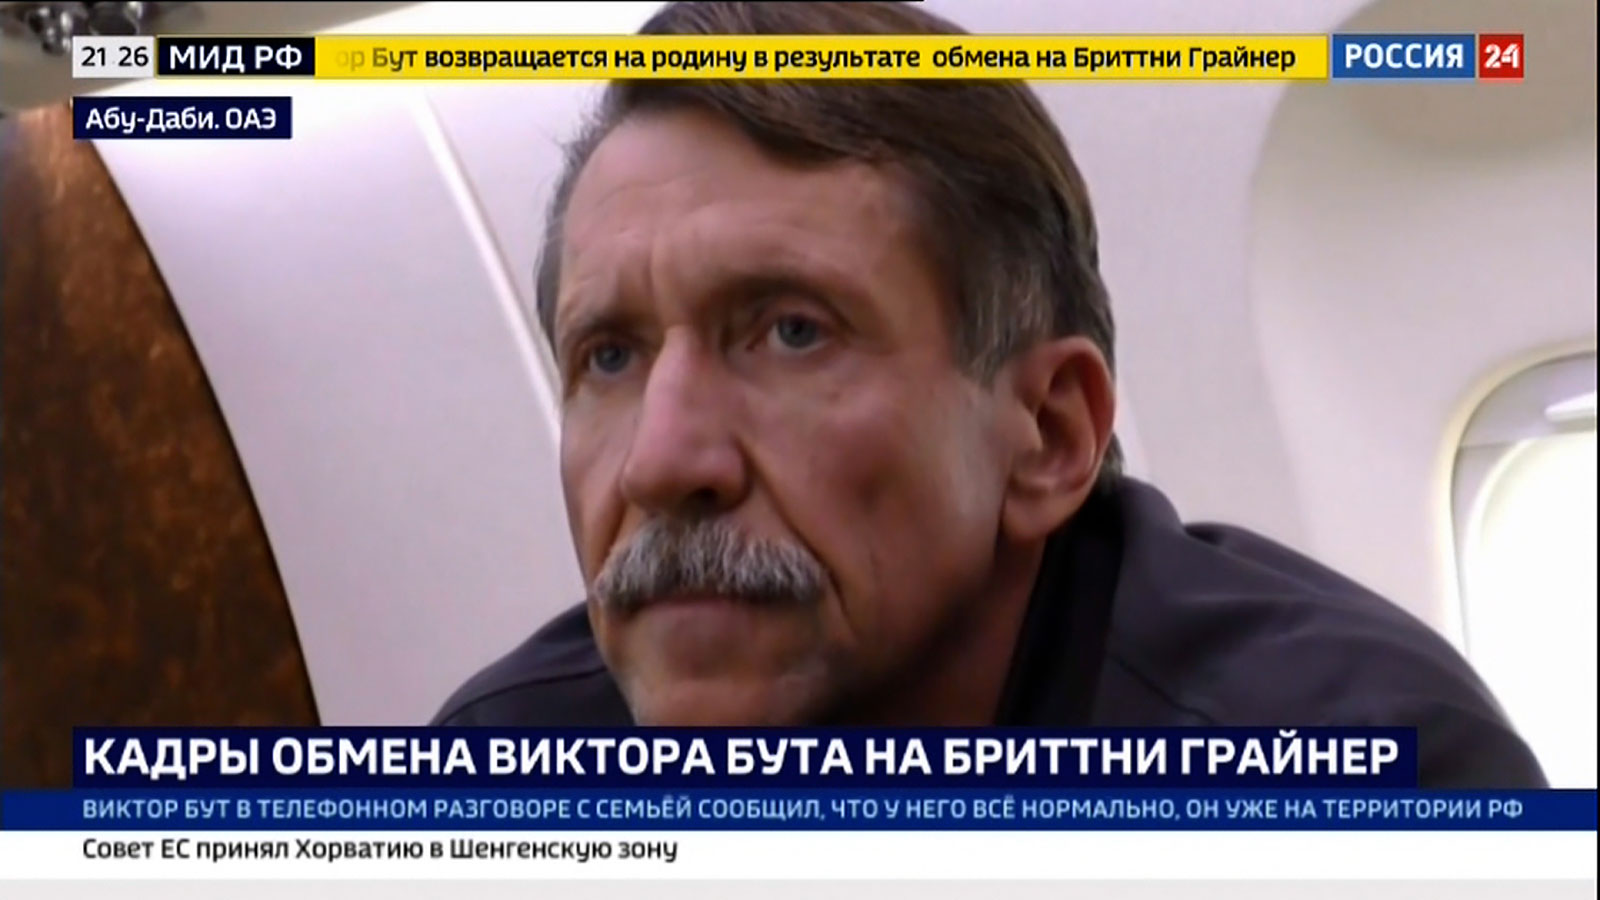 Viktor Bout is seen boarded on a plane on Thursday. 